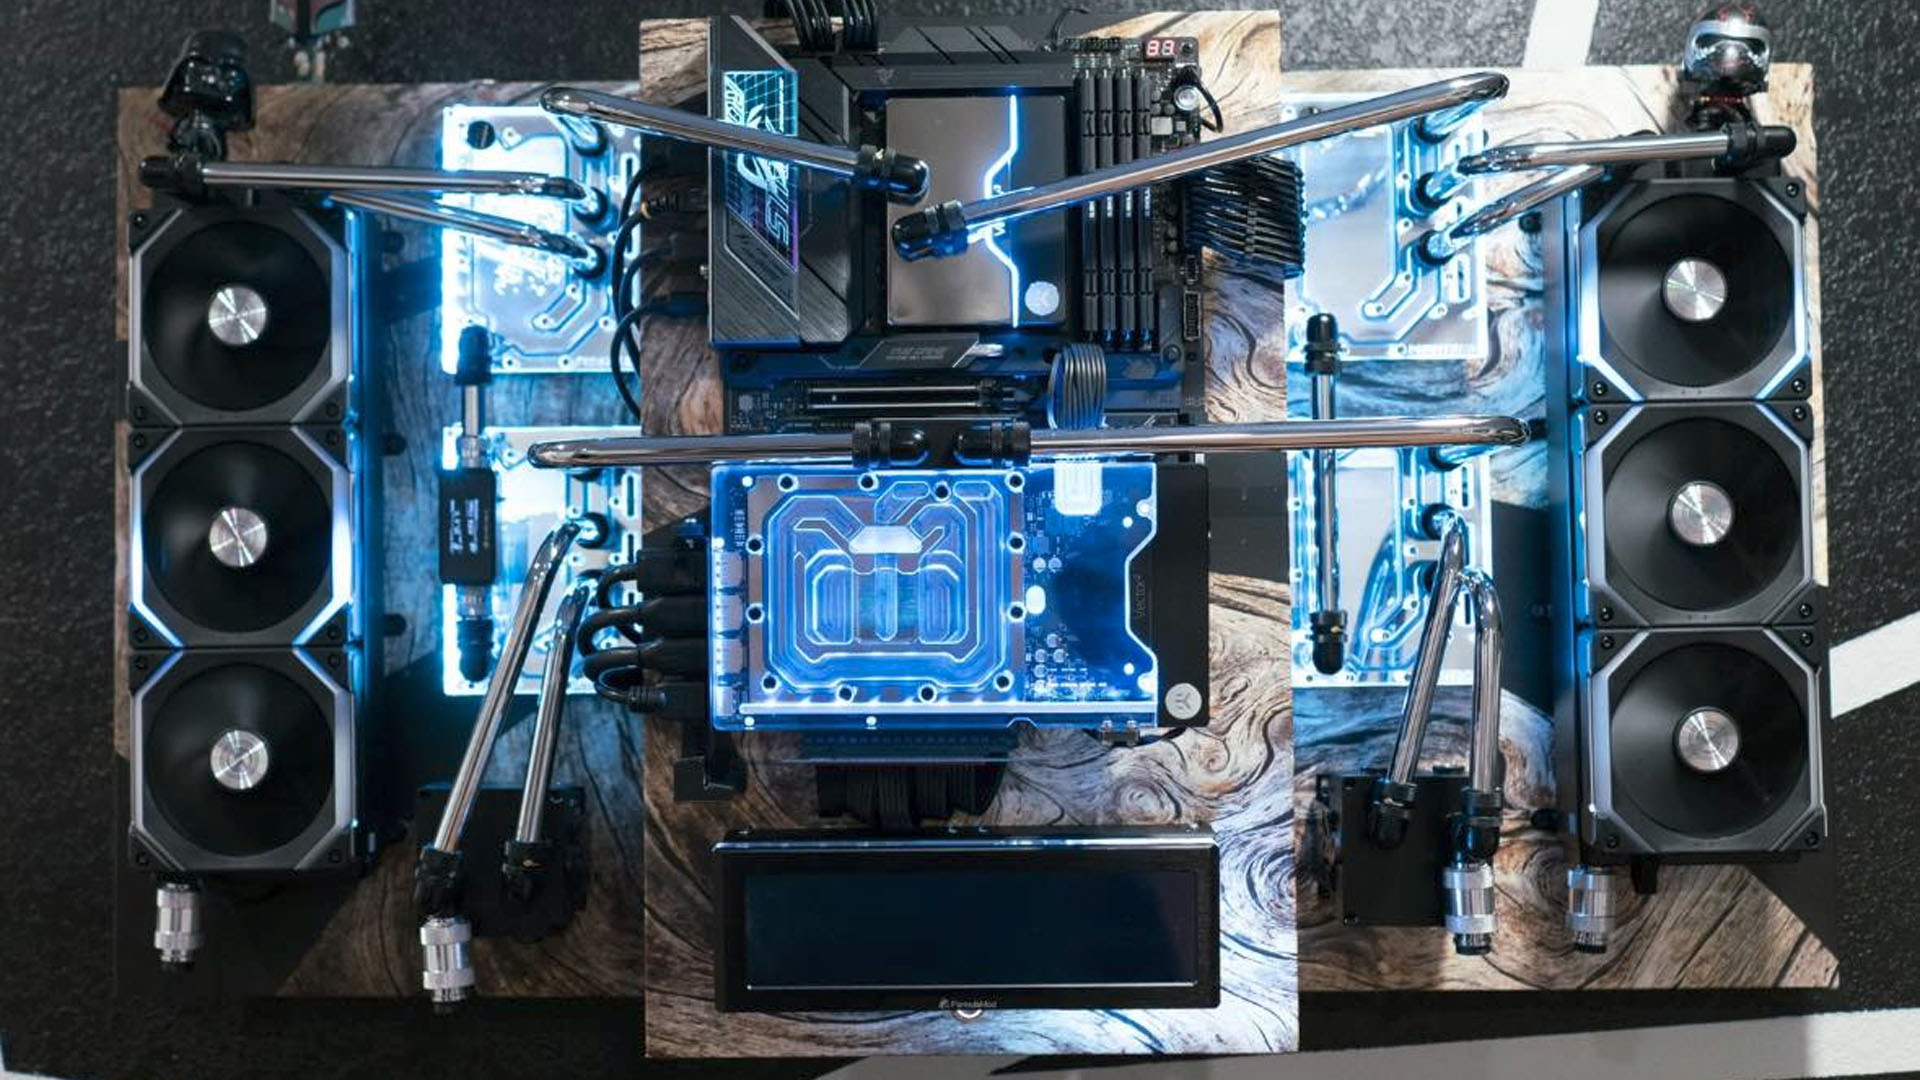 The wall mounted gaming PC with metal tubing and blue coolant